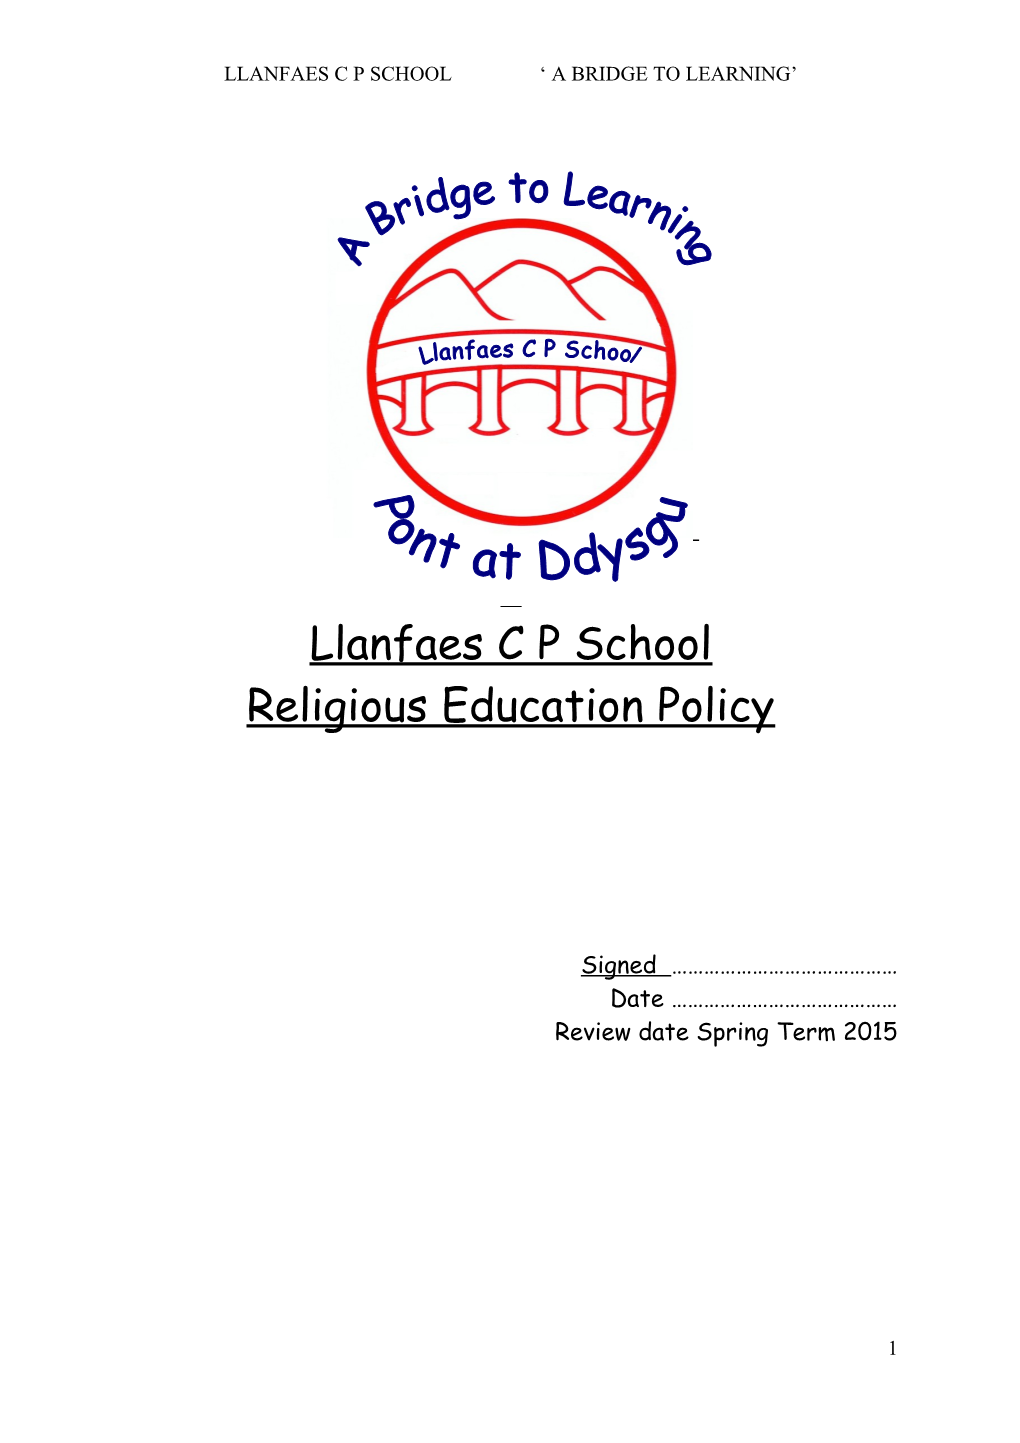 Policy for Religious Education